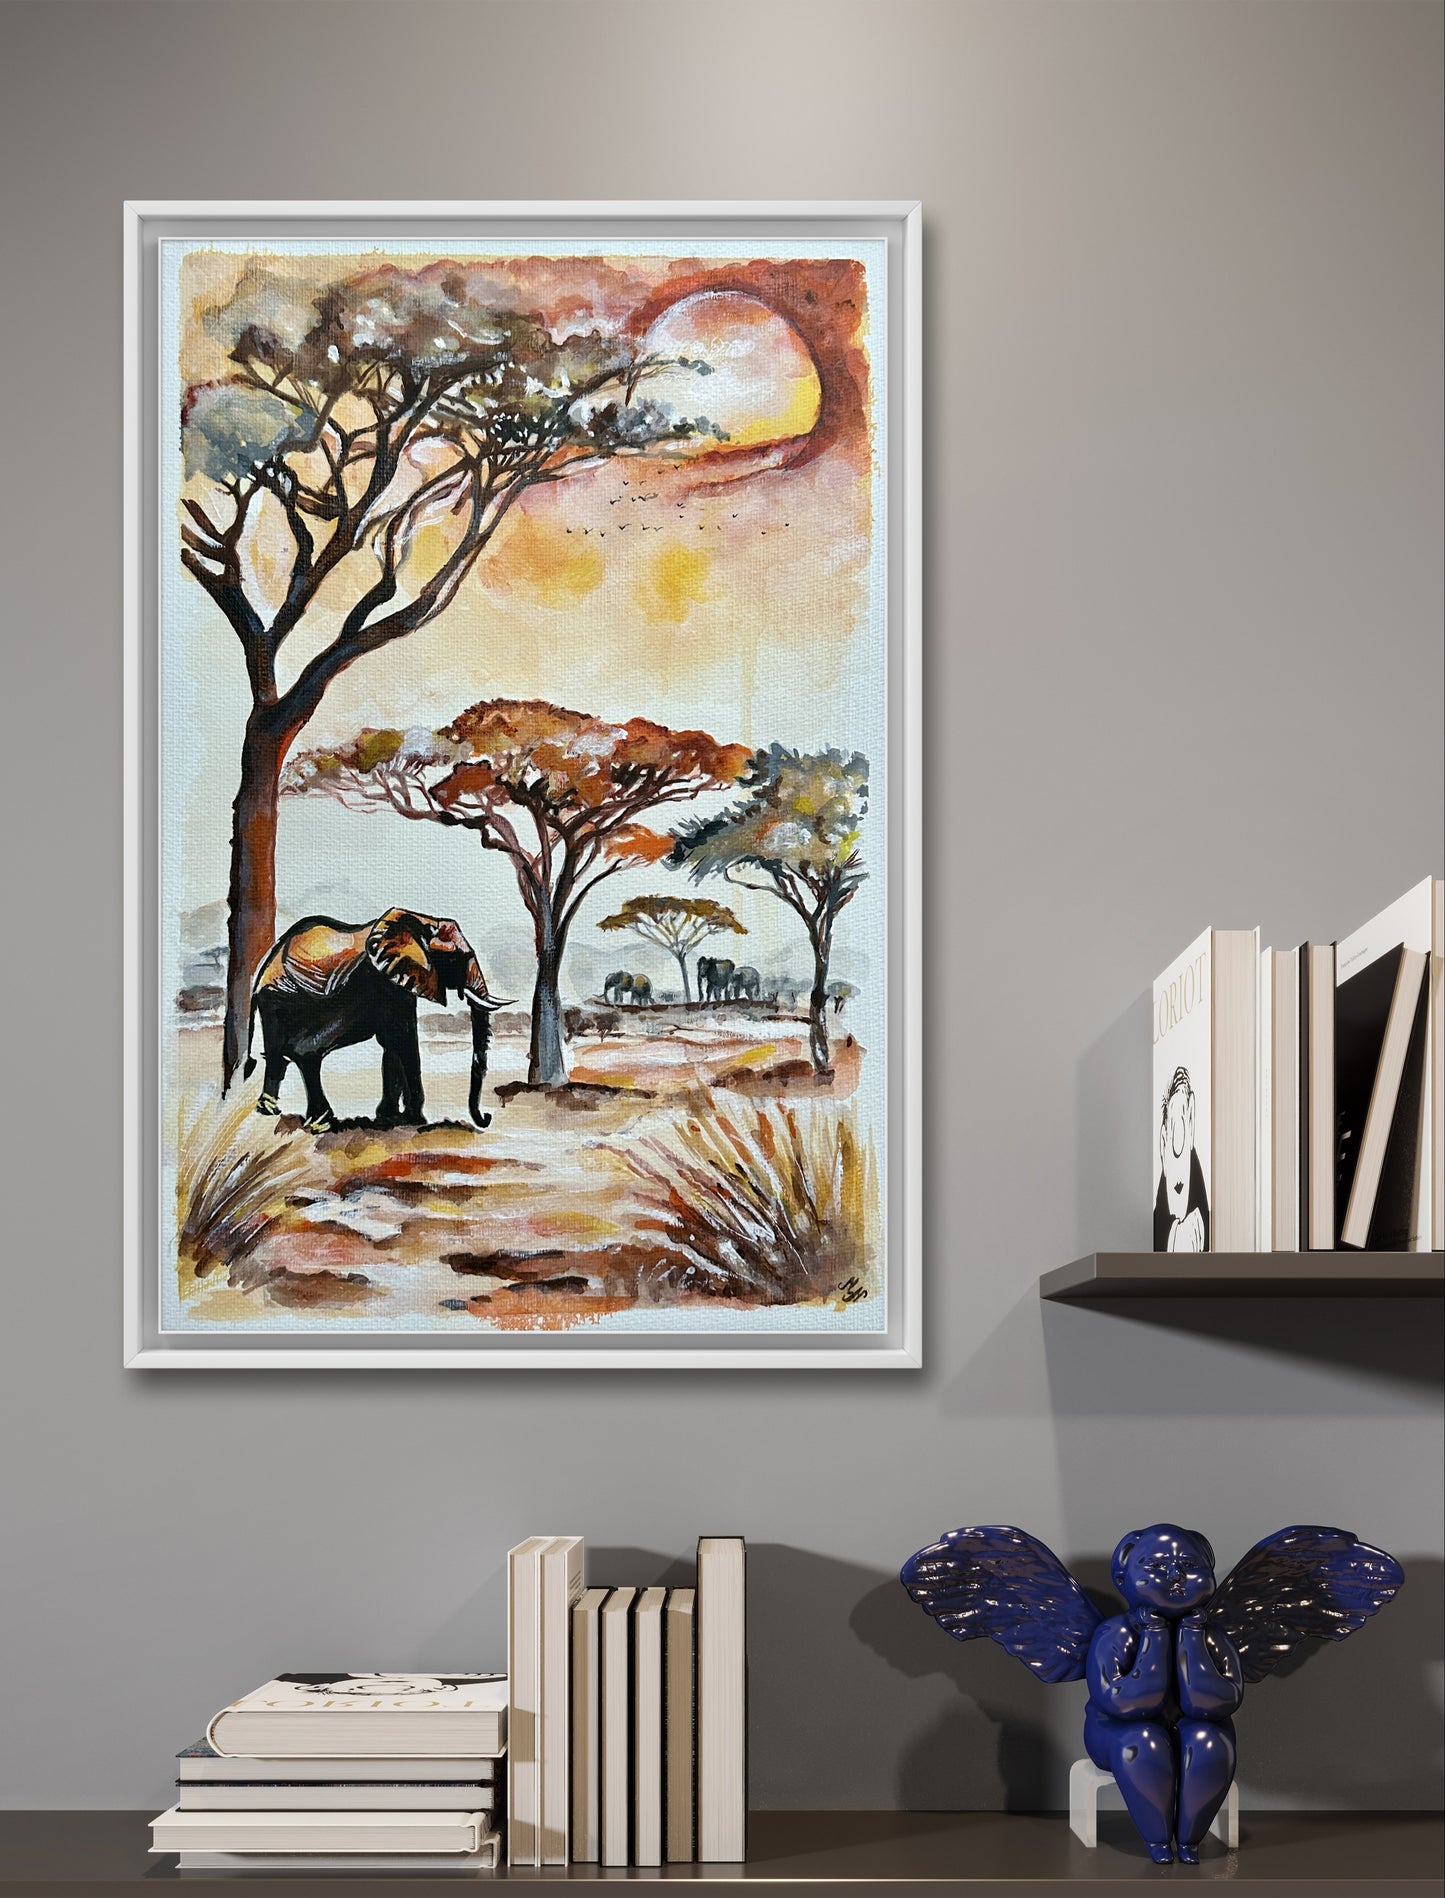 Spectacular canvas painting depicting the magic of an evening on the savannah.